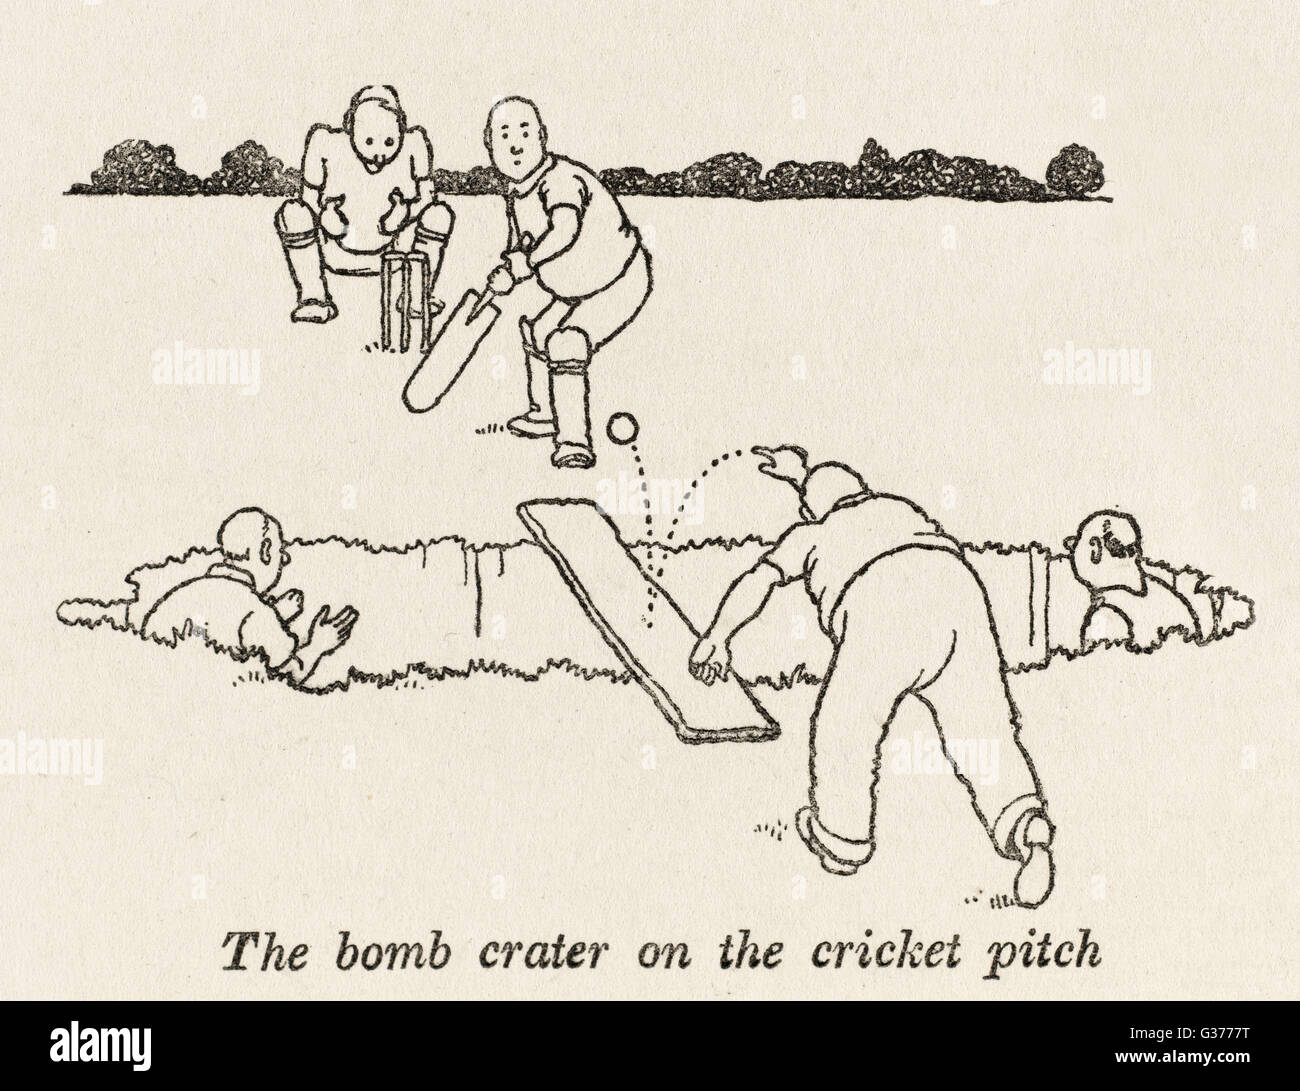 bomb crater, cricket pitch / W H Robinson Stock Photo